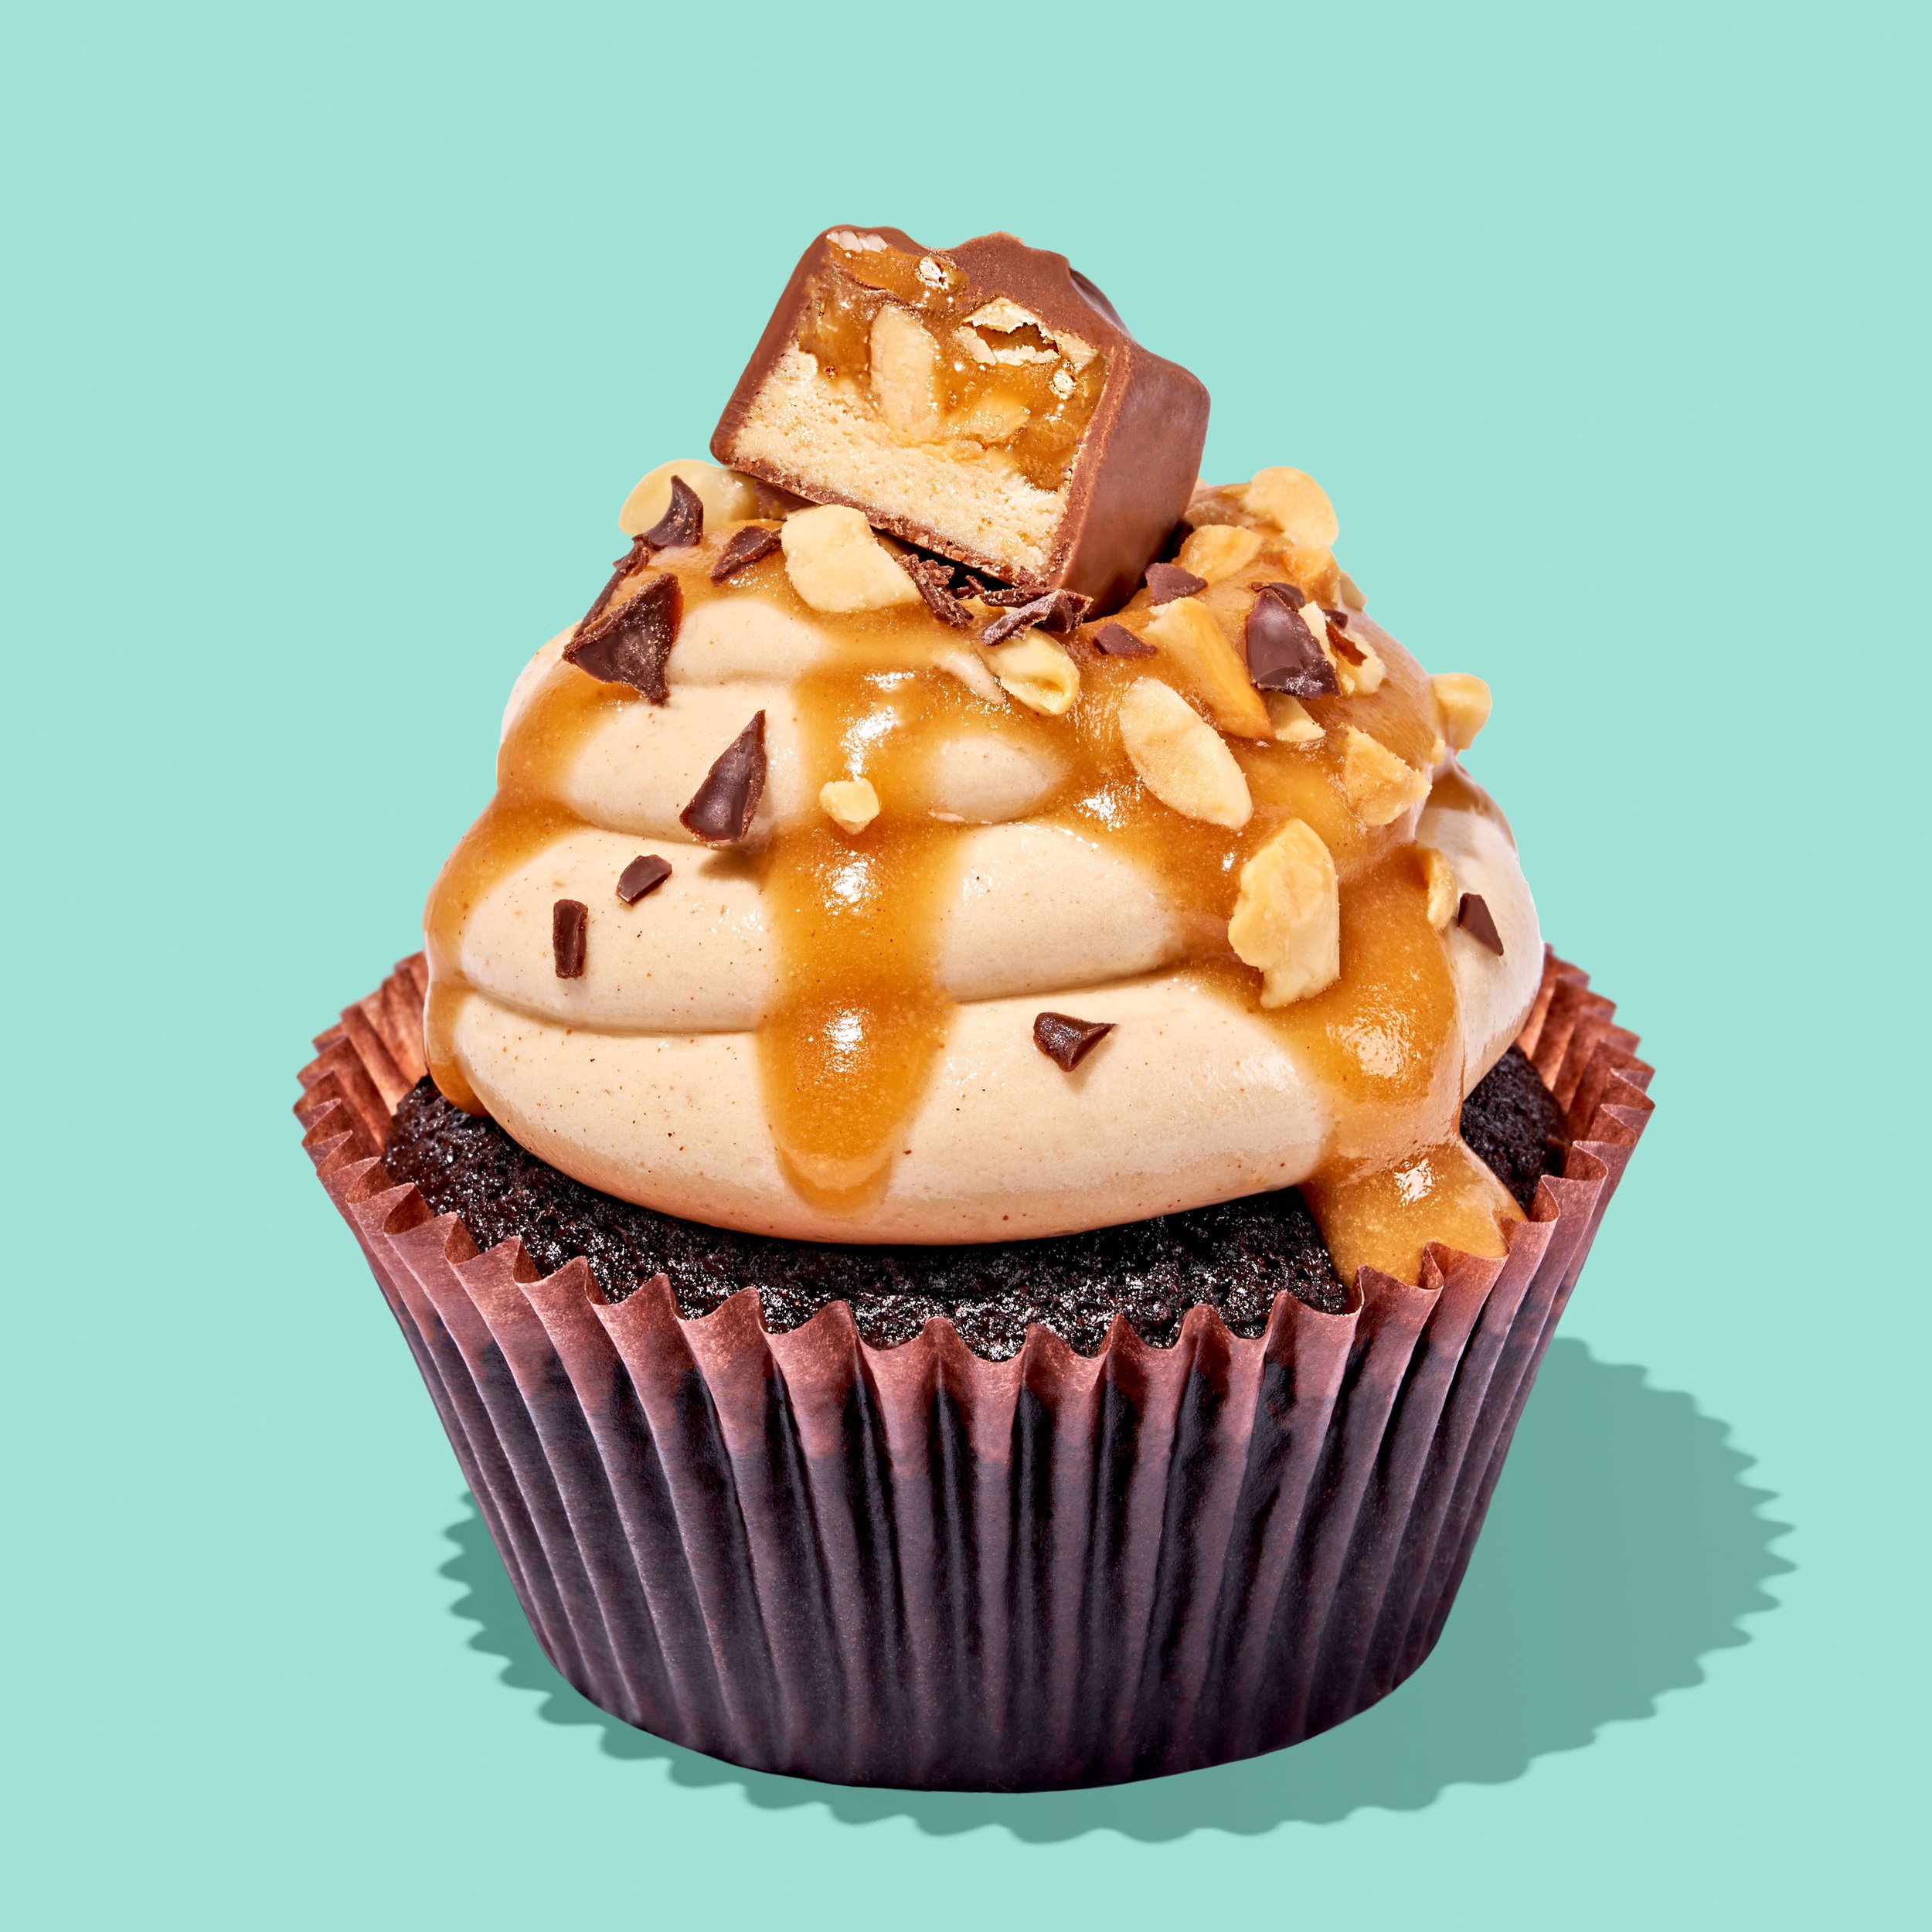 SNICKERS CUPCAKE